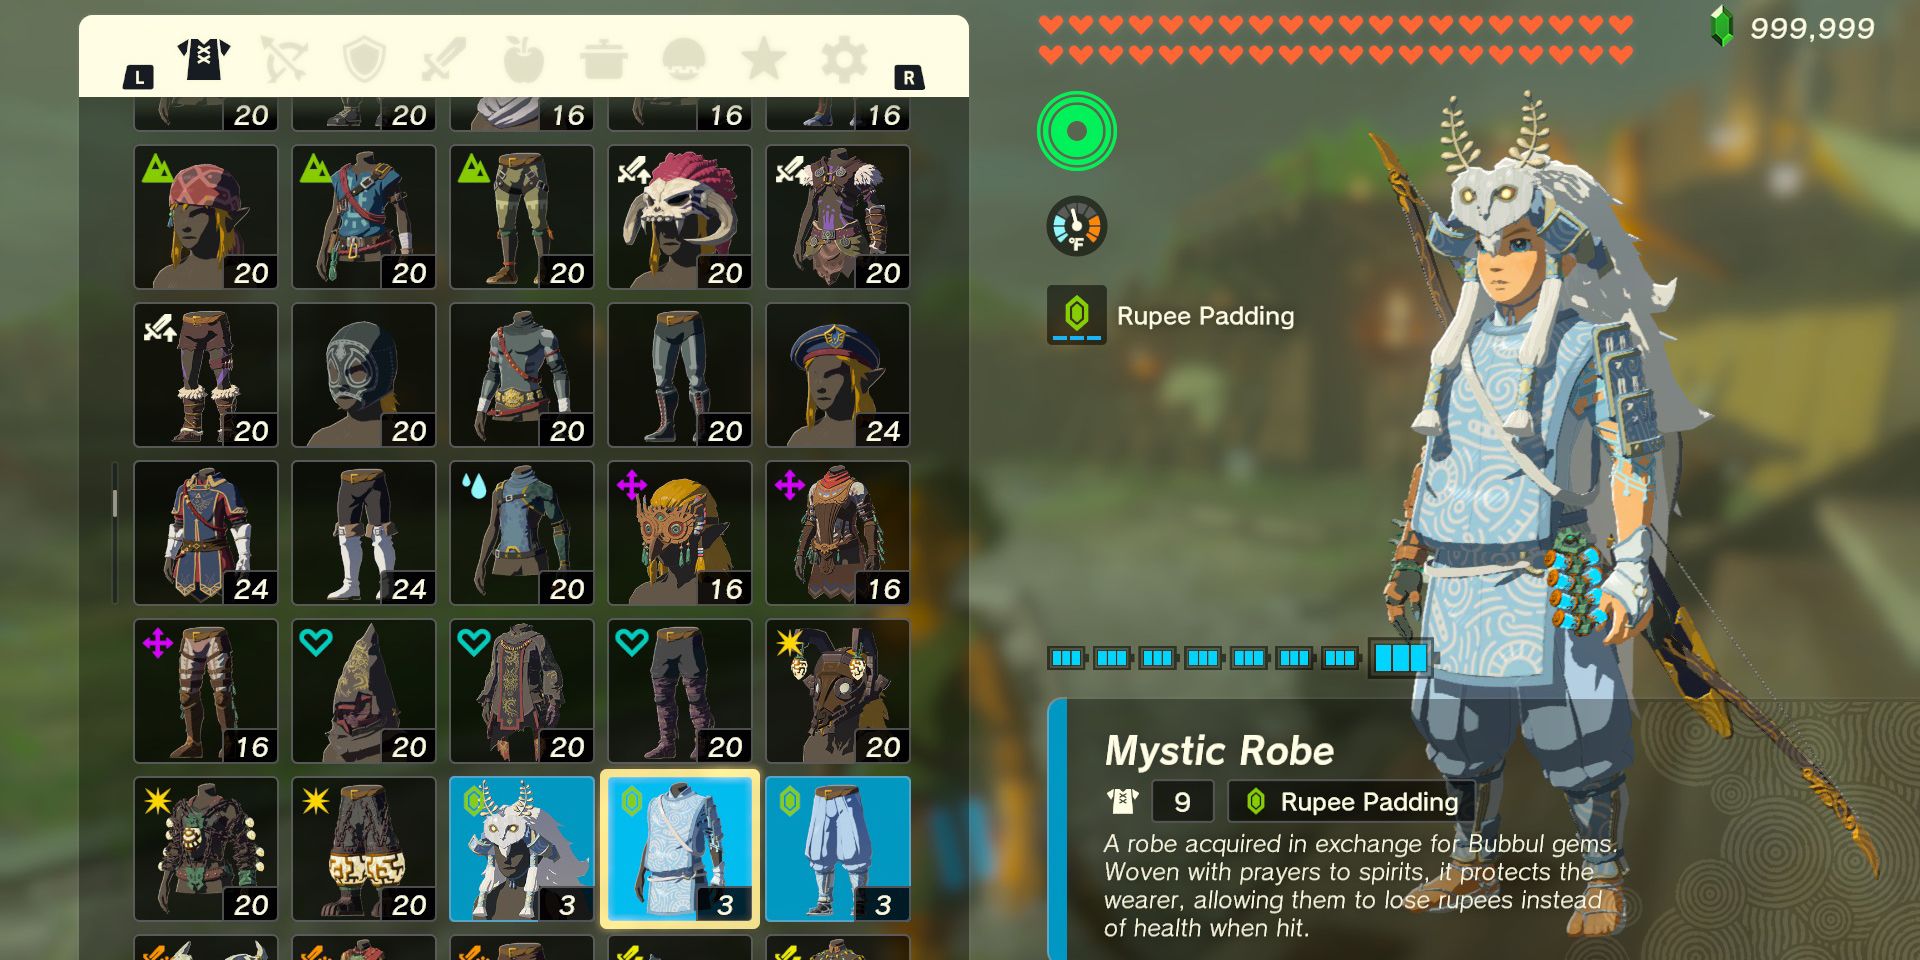 The mystical armor set in The Legend of Zelda: Tears of the Kingdom